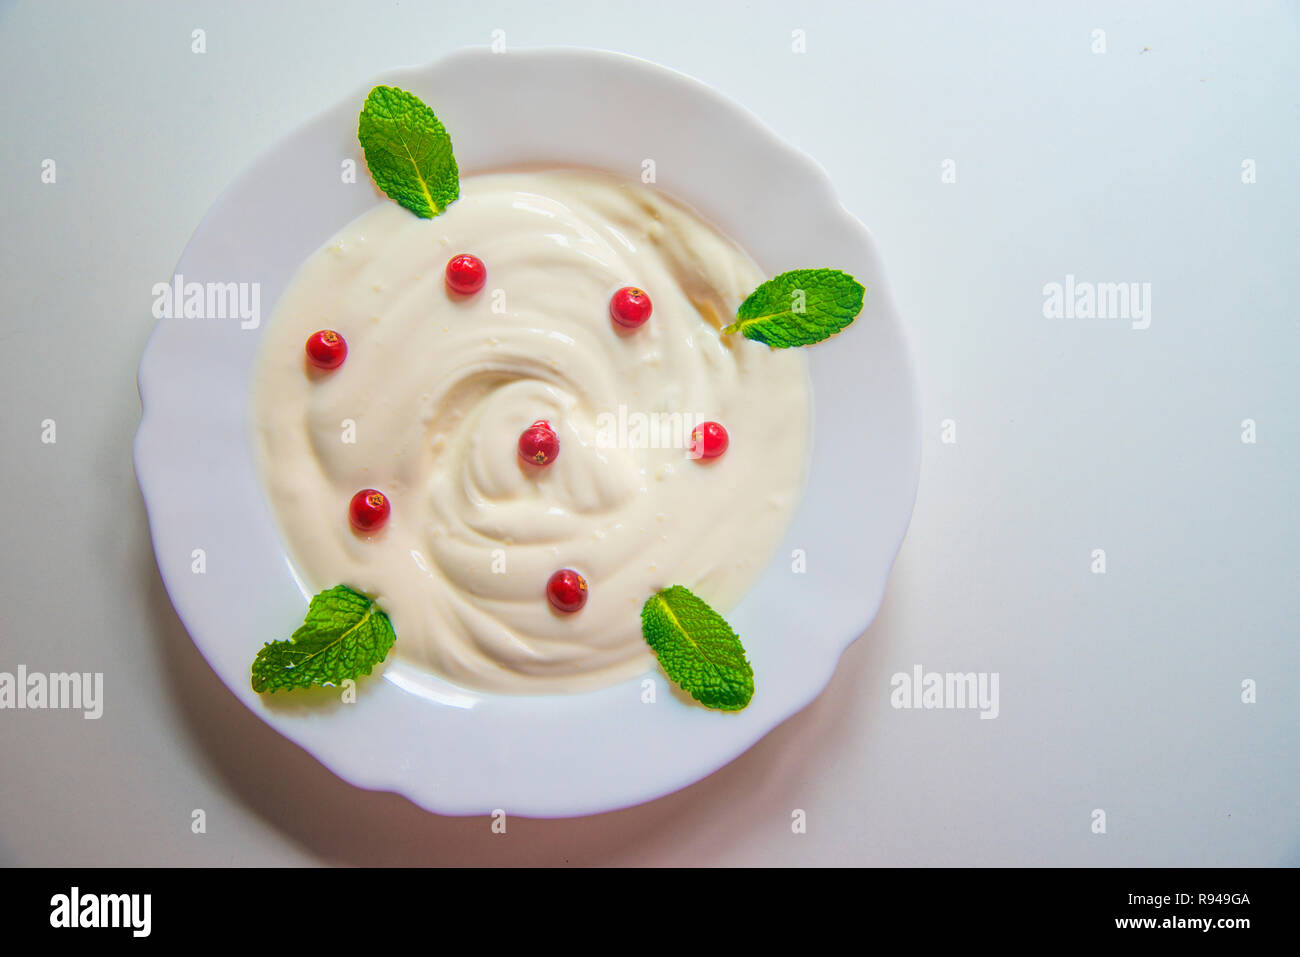 Yoghurt cream with redcurrants and mint leaves. View from above. Stock Photo